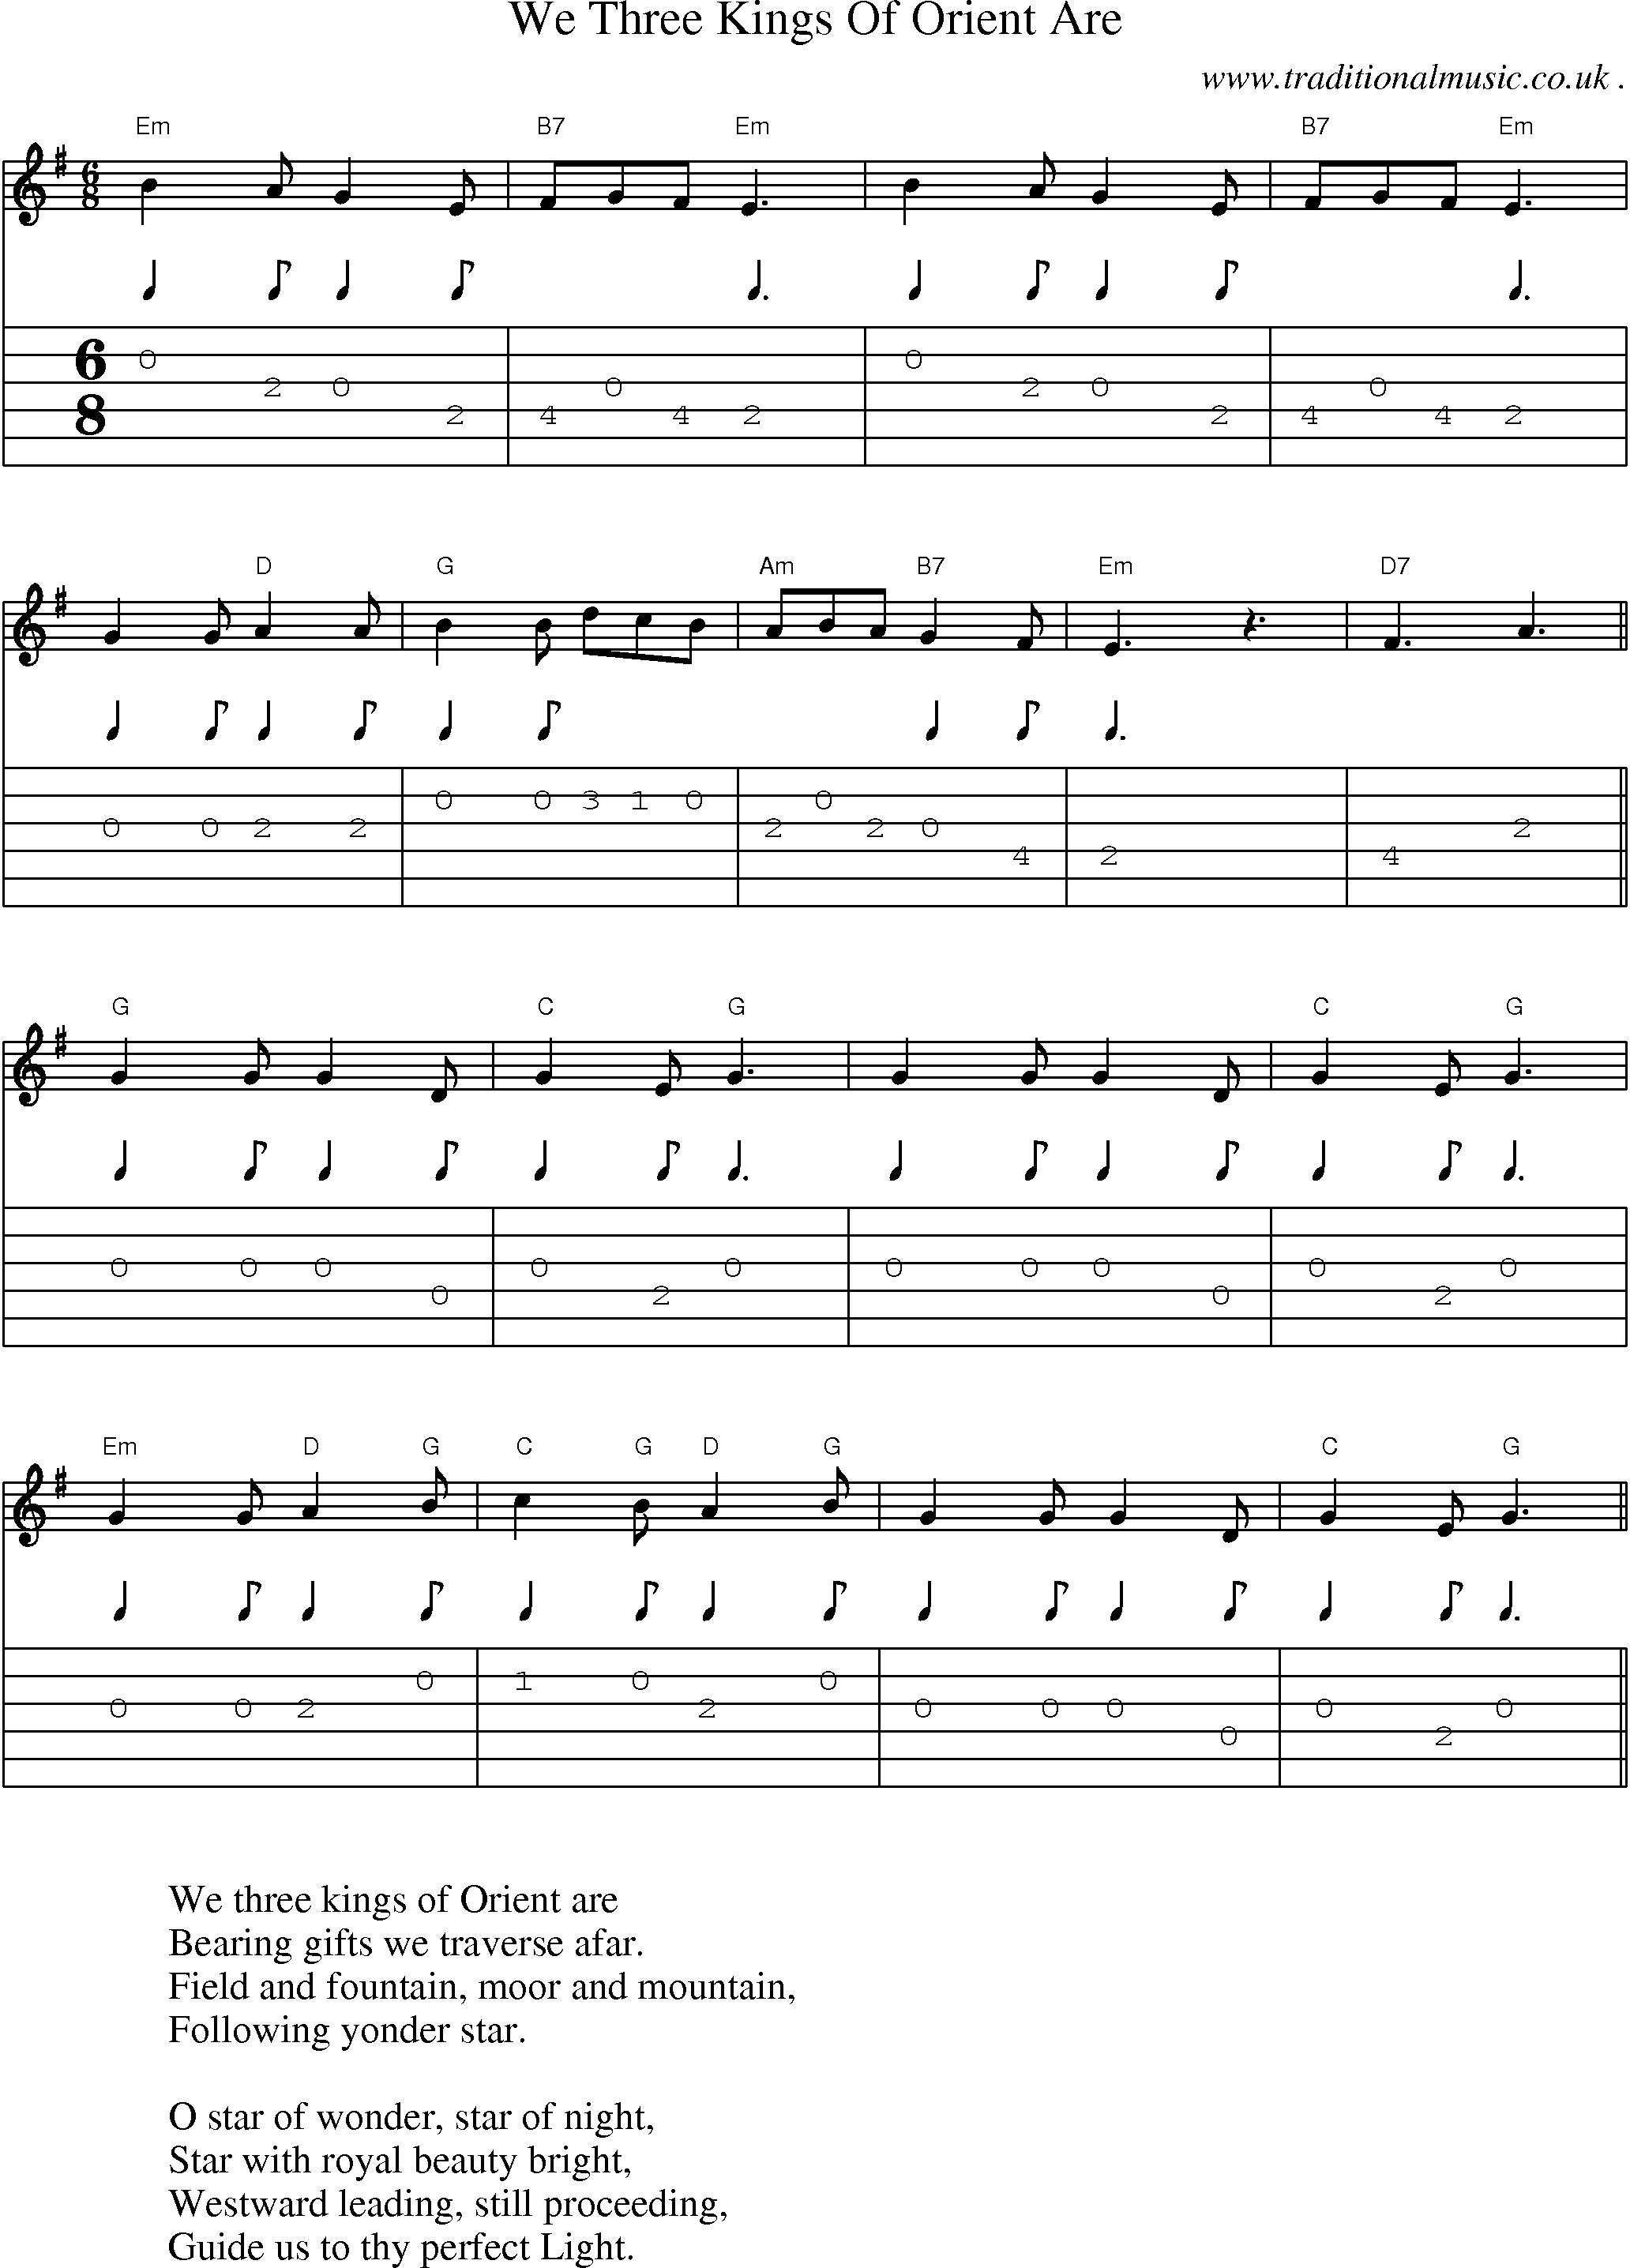 Music Score and Guitar Tabs for We Three Kings Of Orient Are